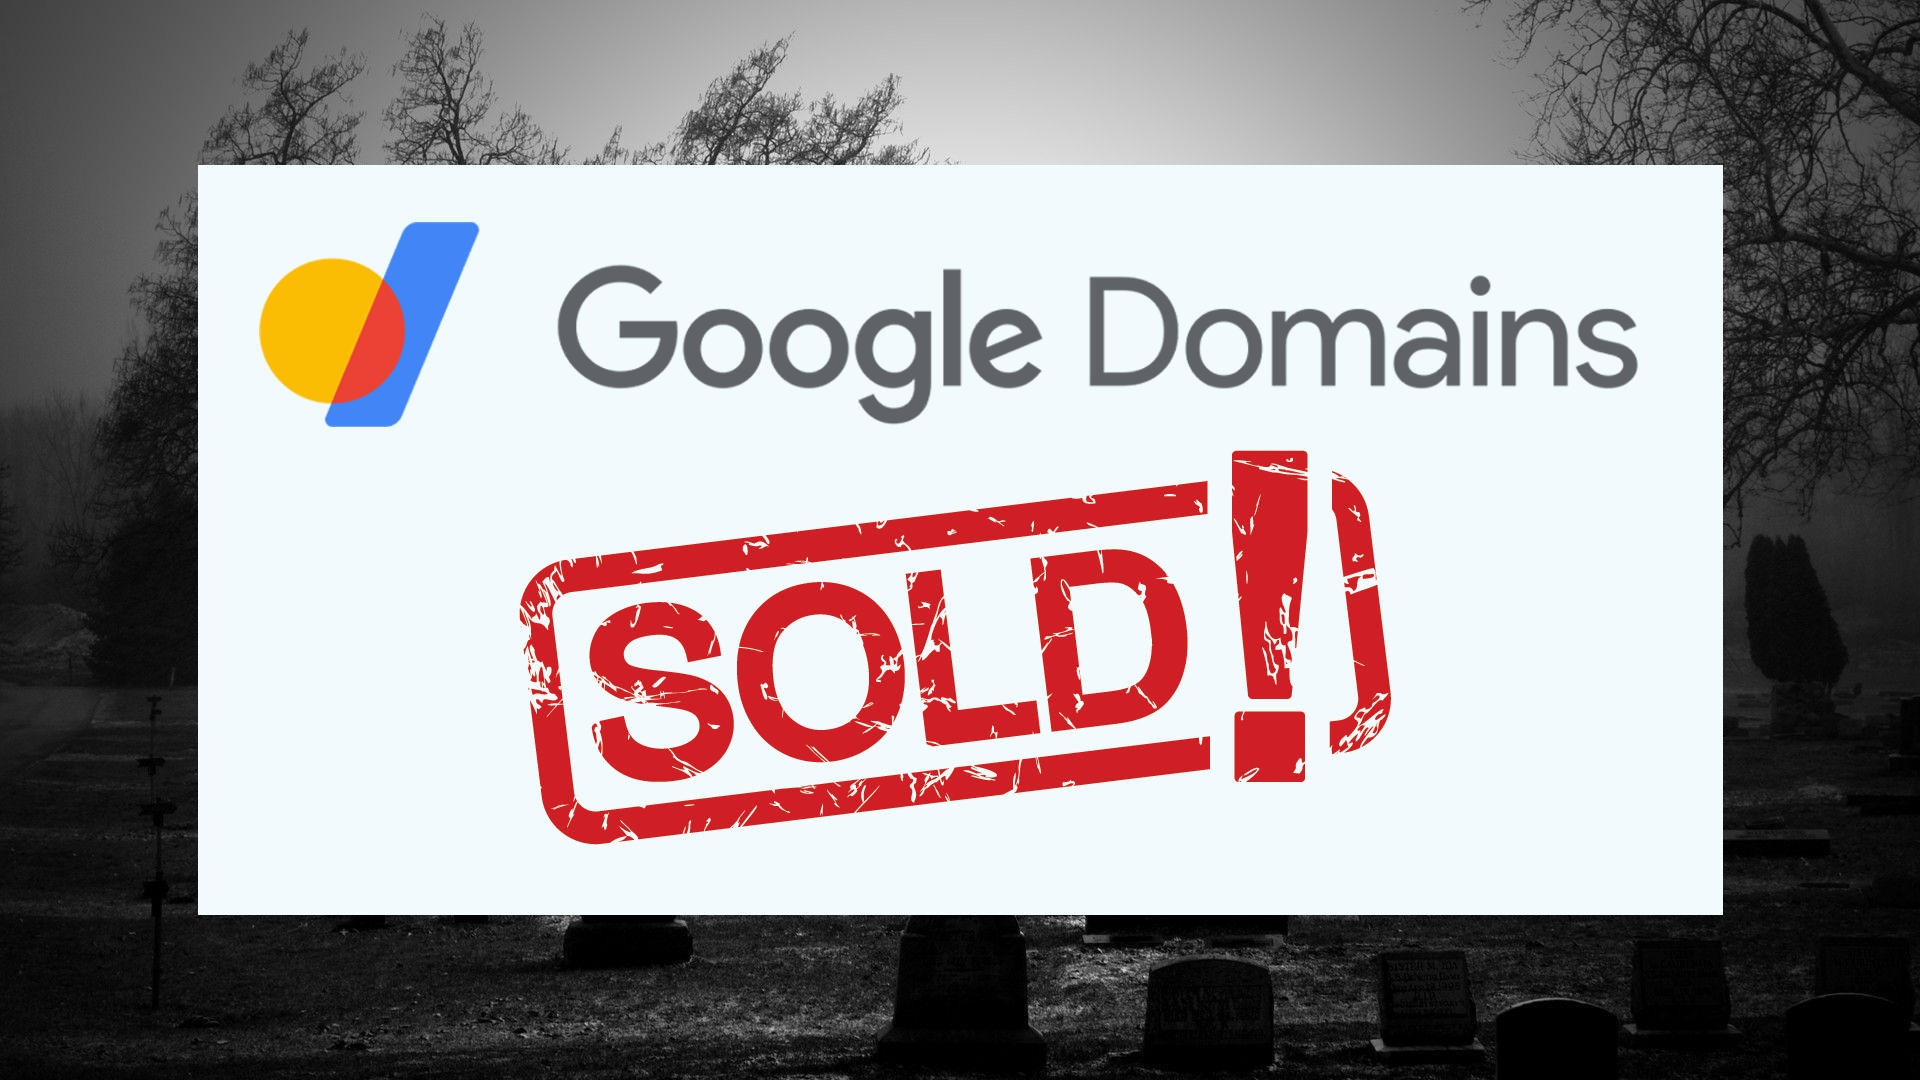 Google Domains Sold to Squarespace